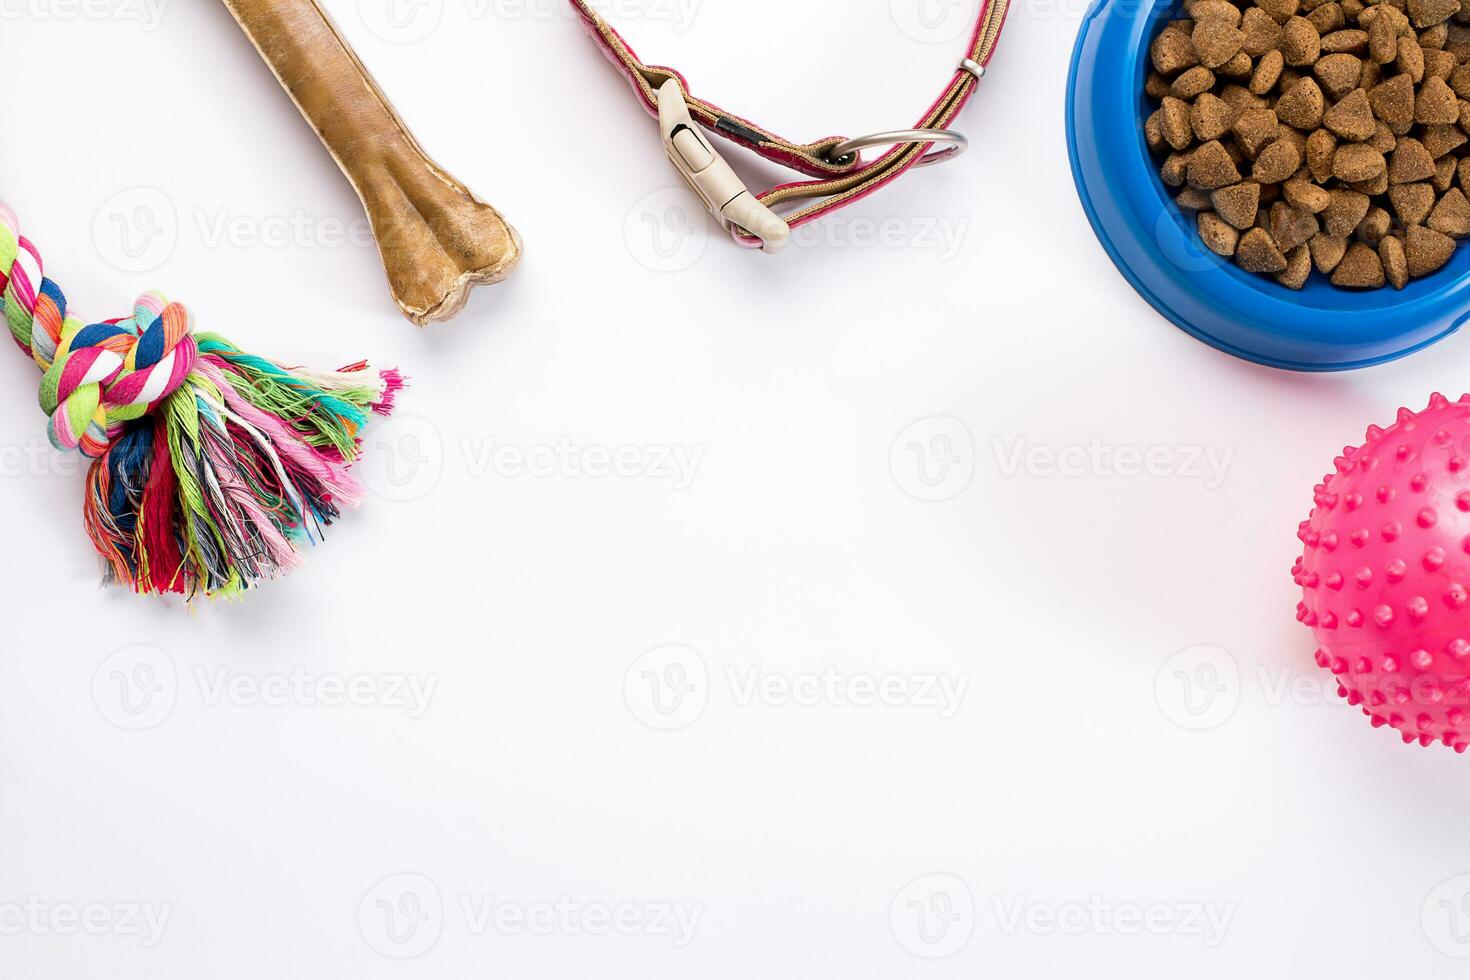 Collar, blue bowl with feed, leash and delicacy for dogs. Isolated on white background photo